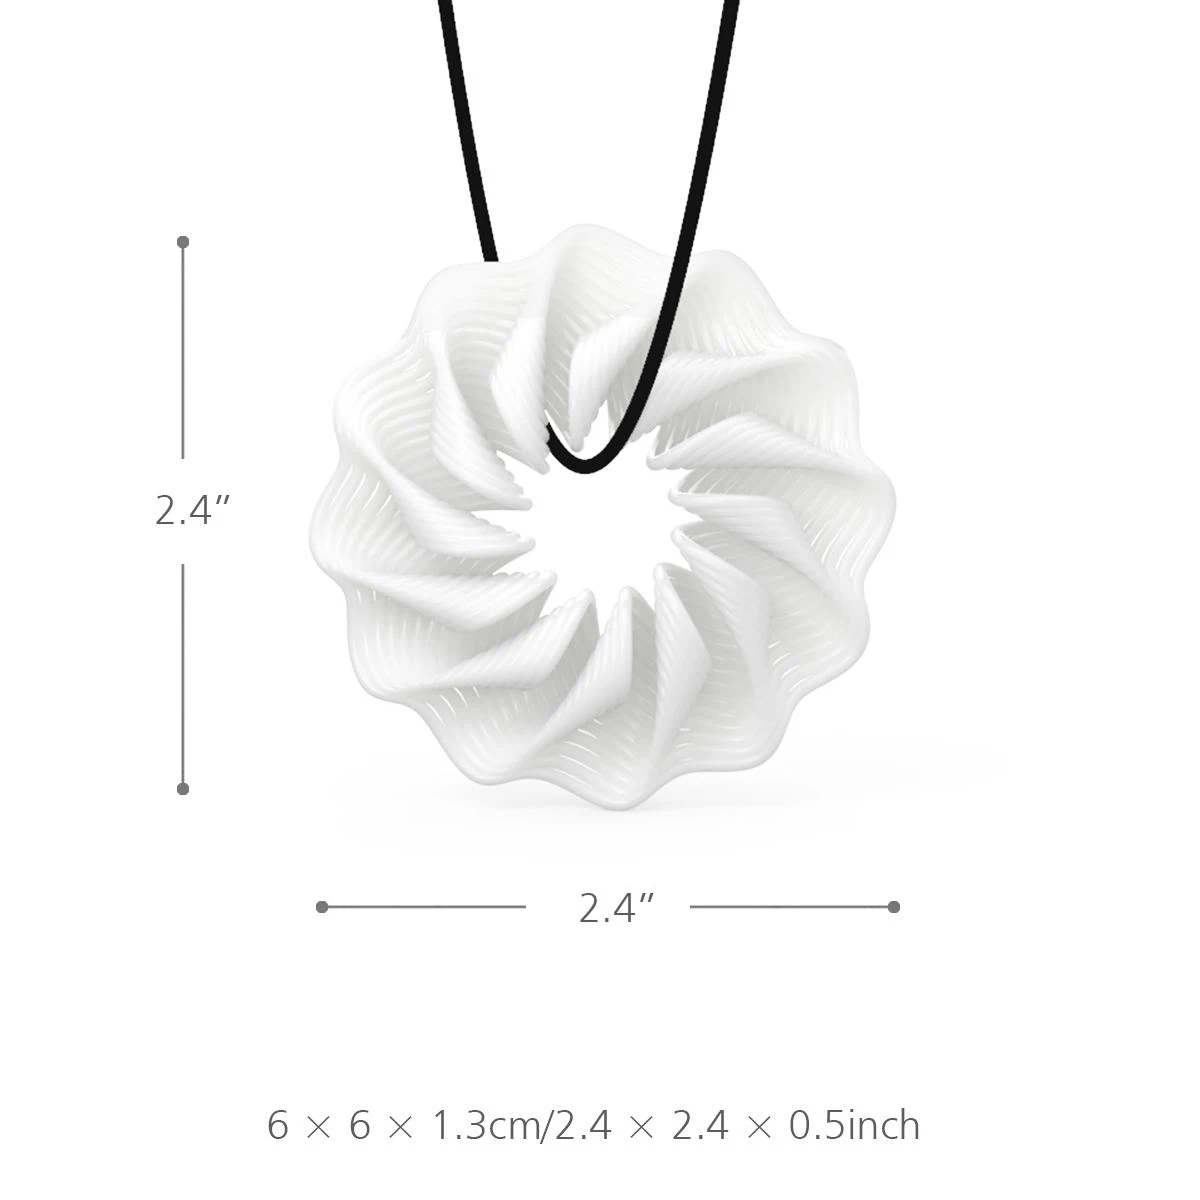 Tooarts Tomfeel 3D Printed Jewelry Rhythm Elegant Modeling Pendant Necklace Accessories | Дом и сад